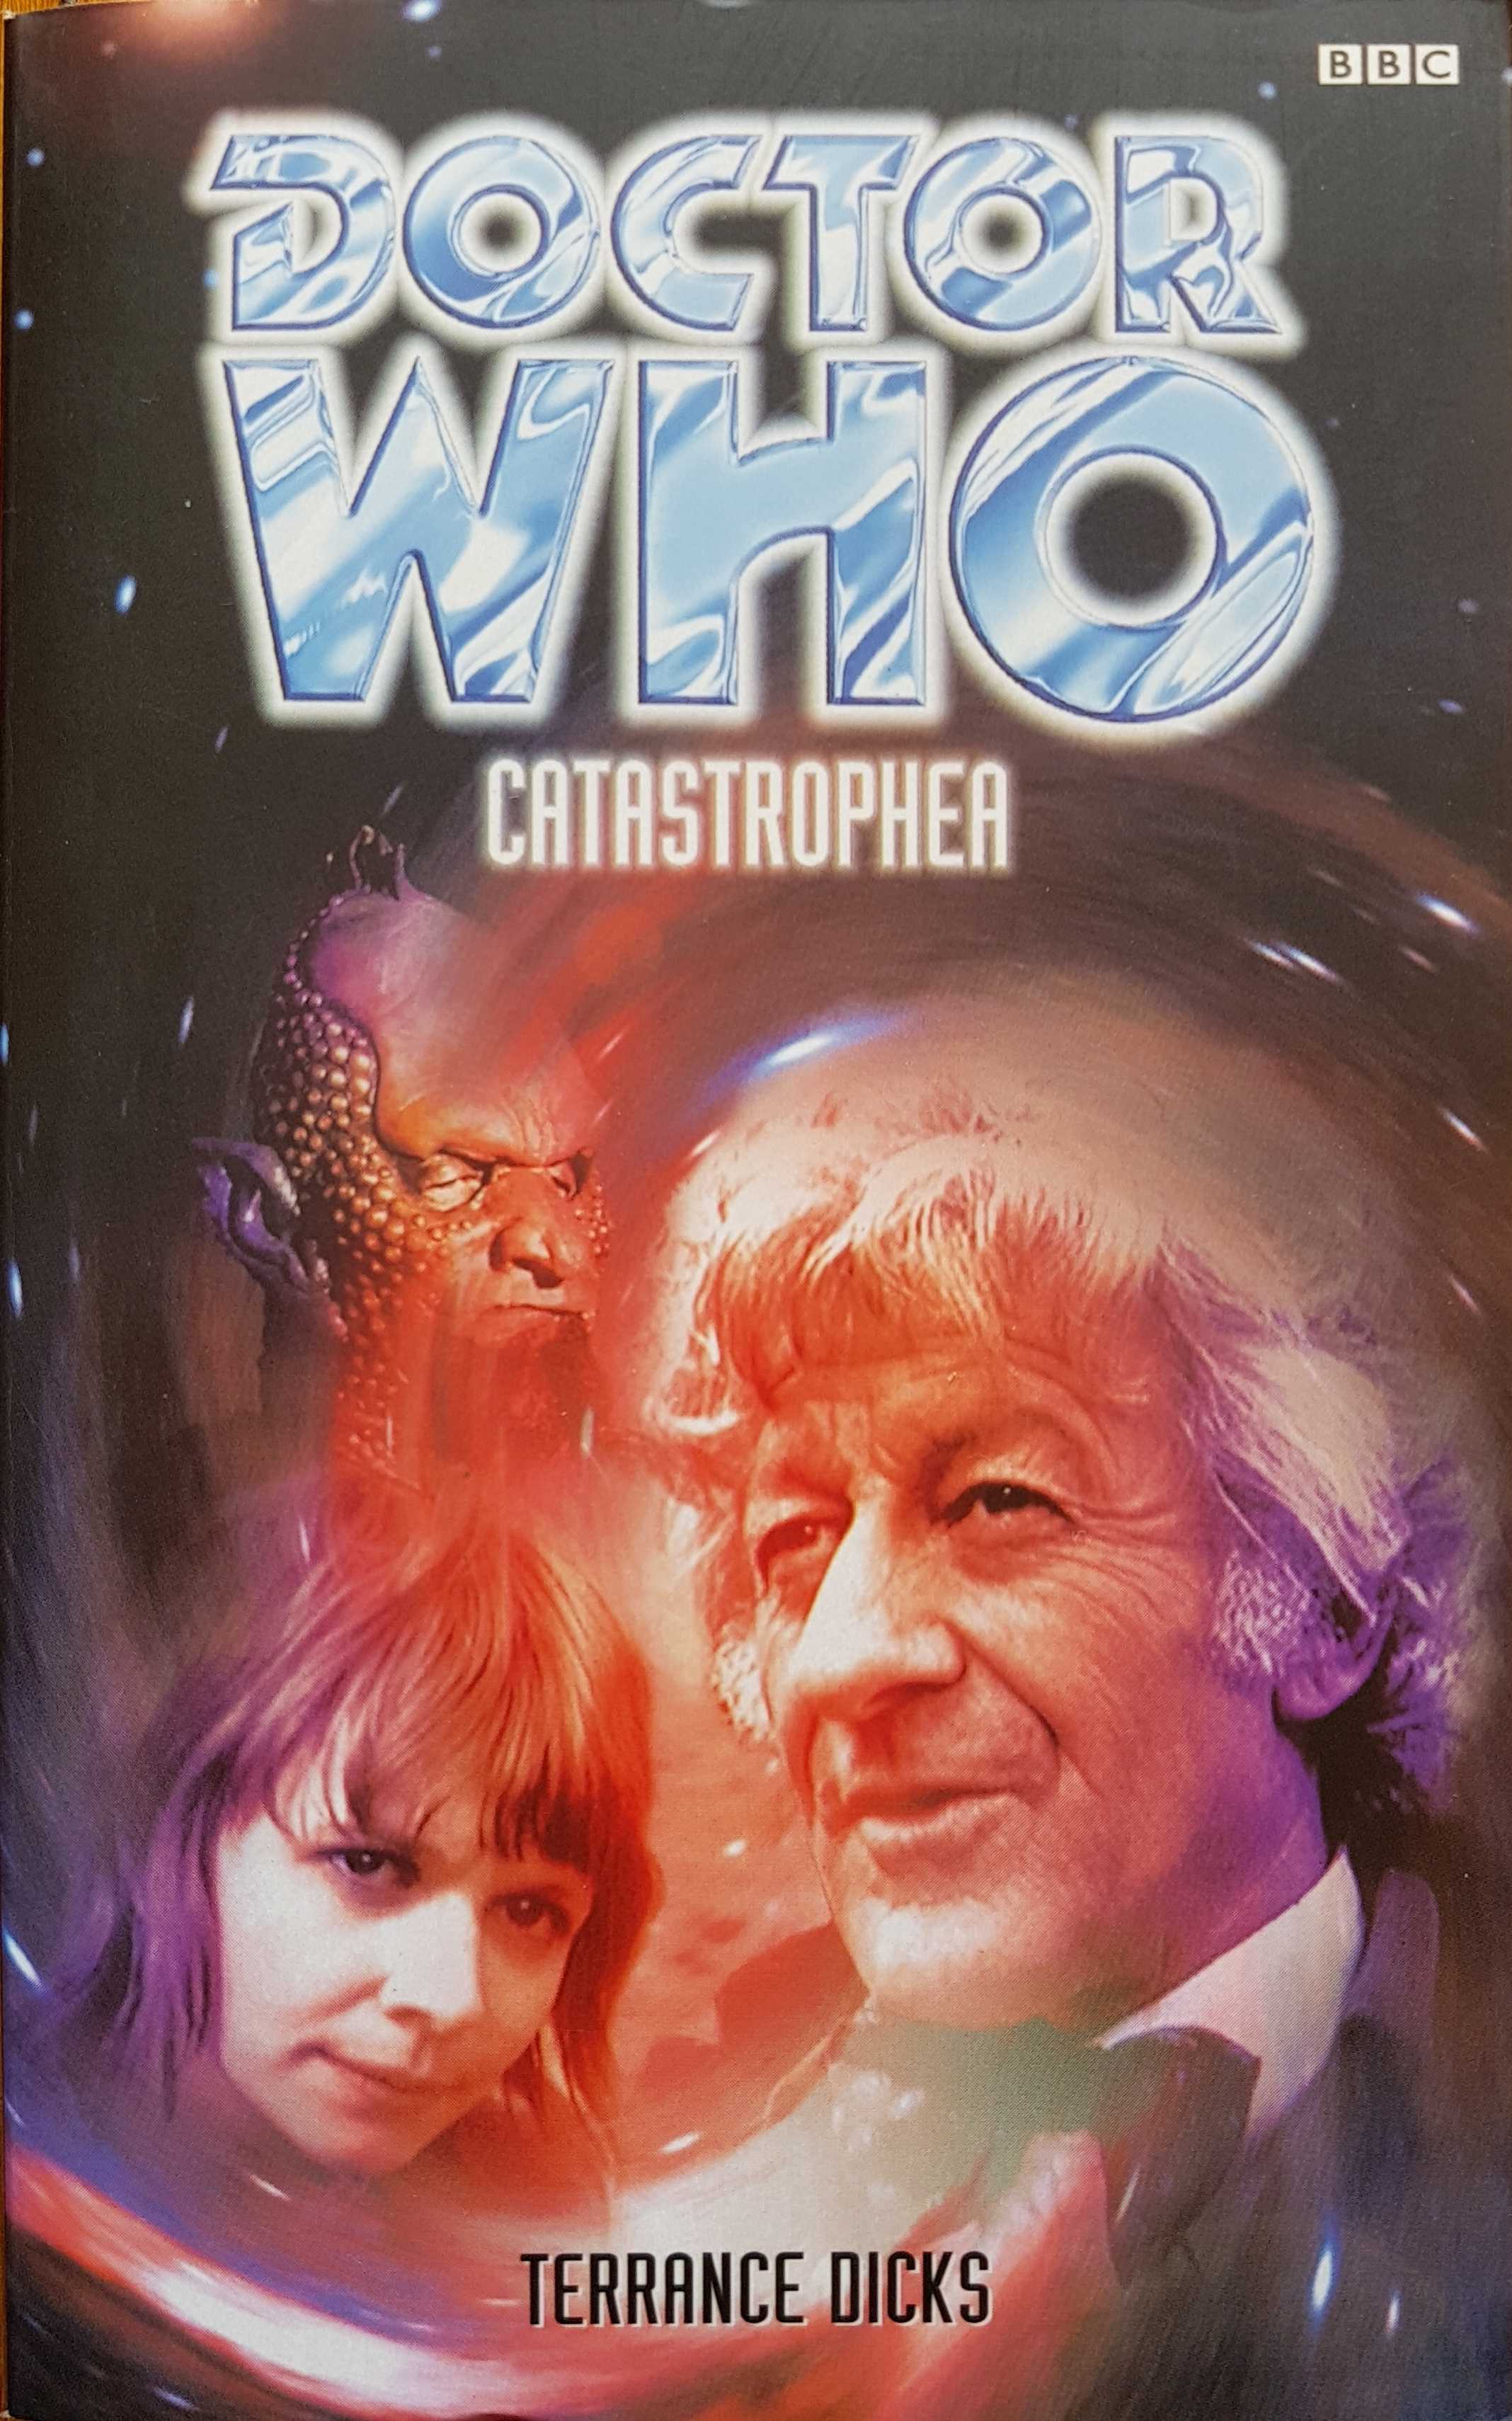 Picture of 0-563-40584-8 Doctor Who - Catastropher by artist Terrance Dicks from the BBC books - Records and Tapes library